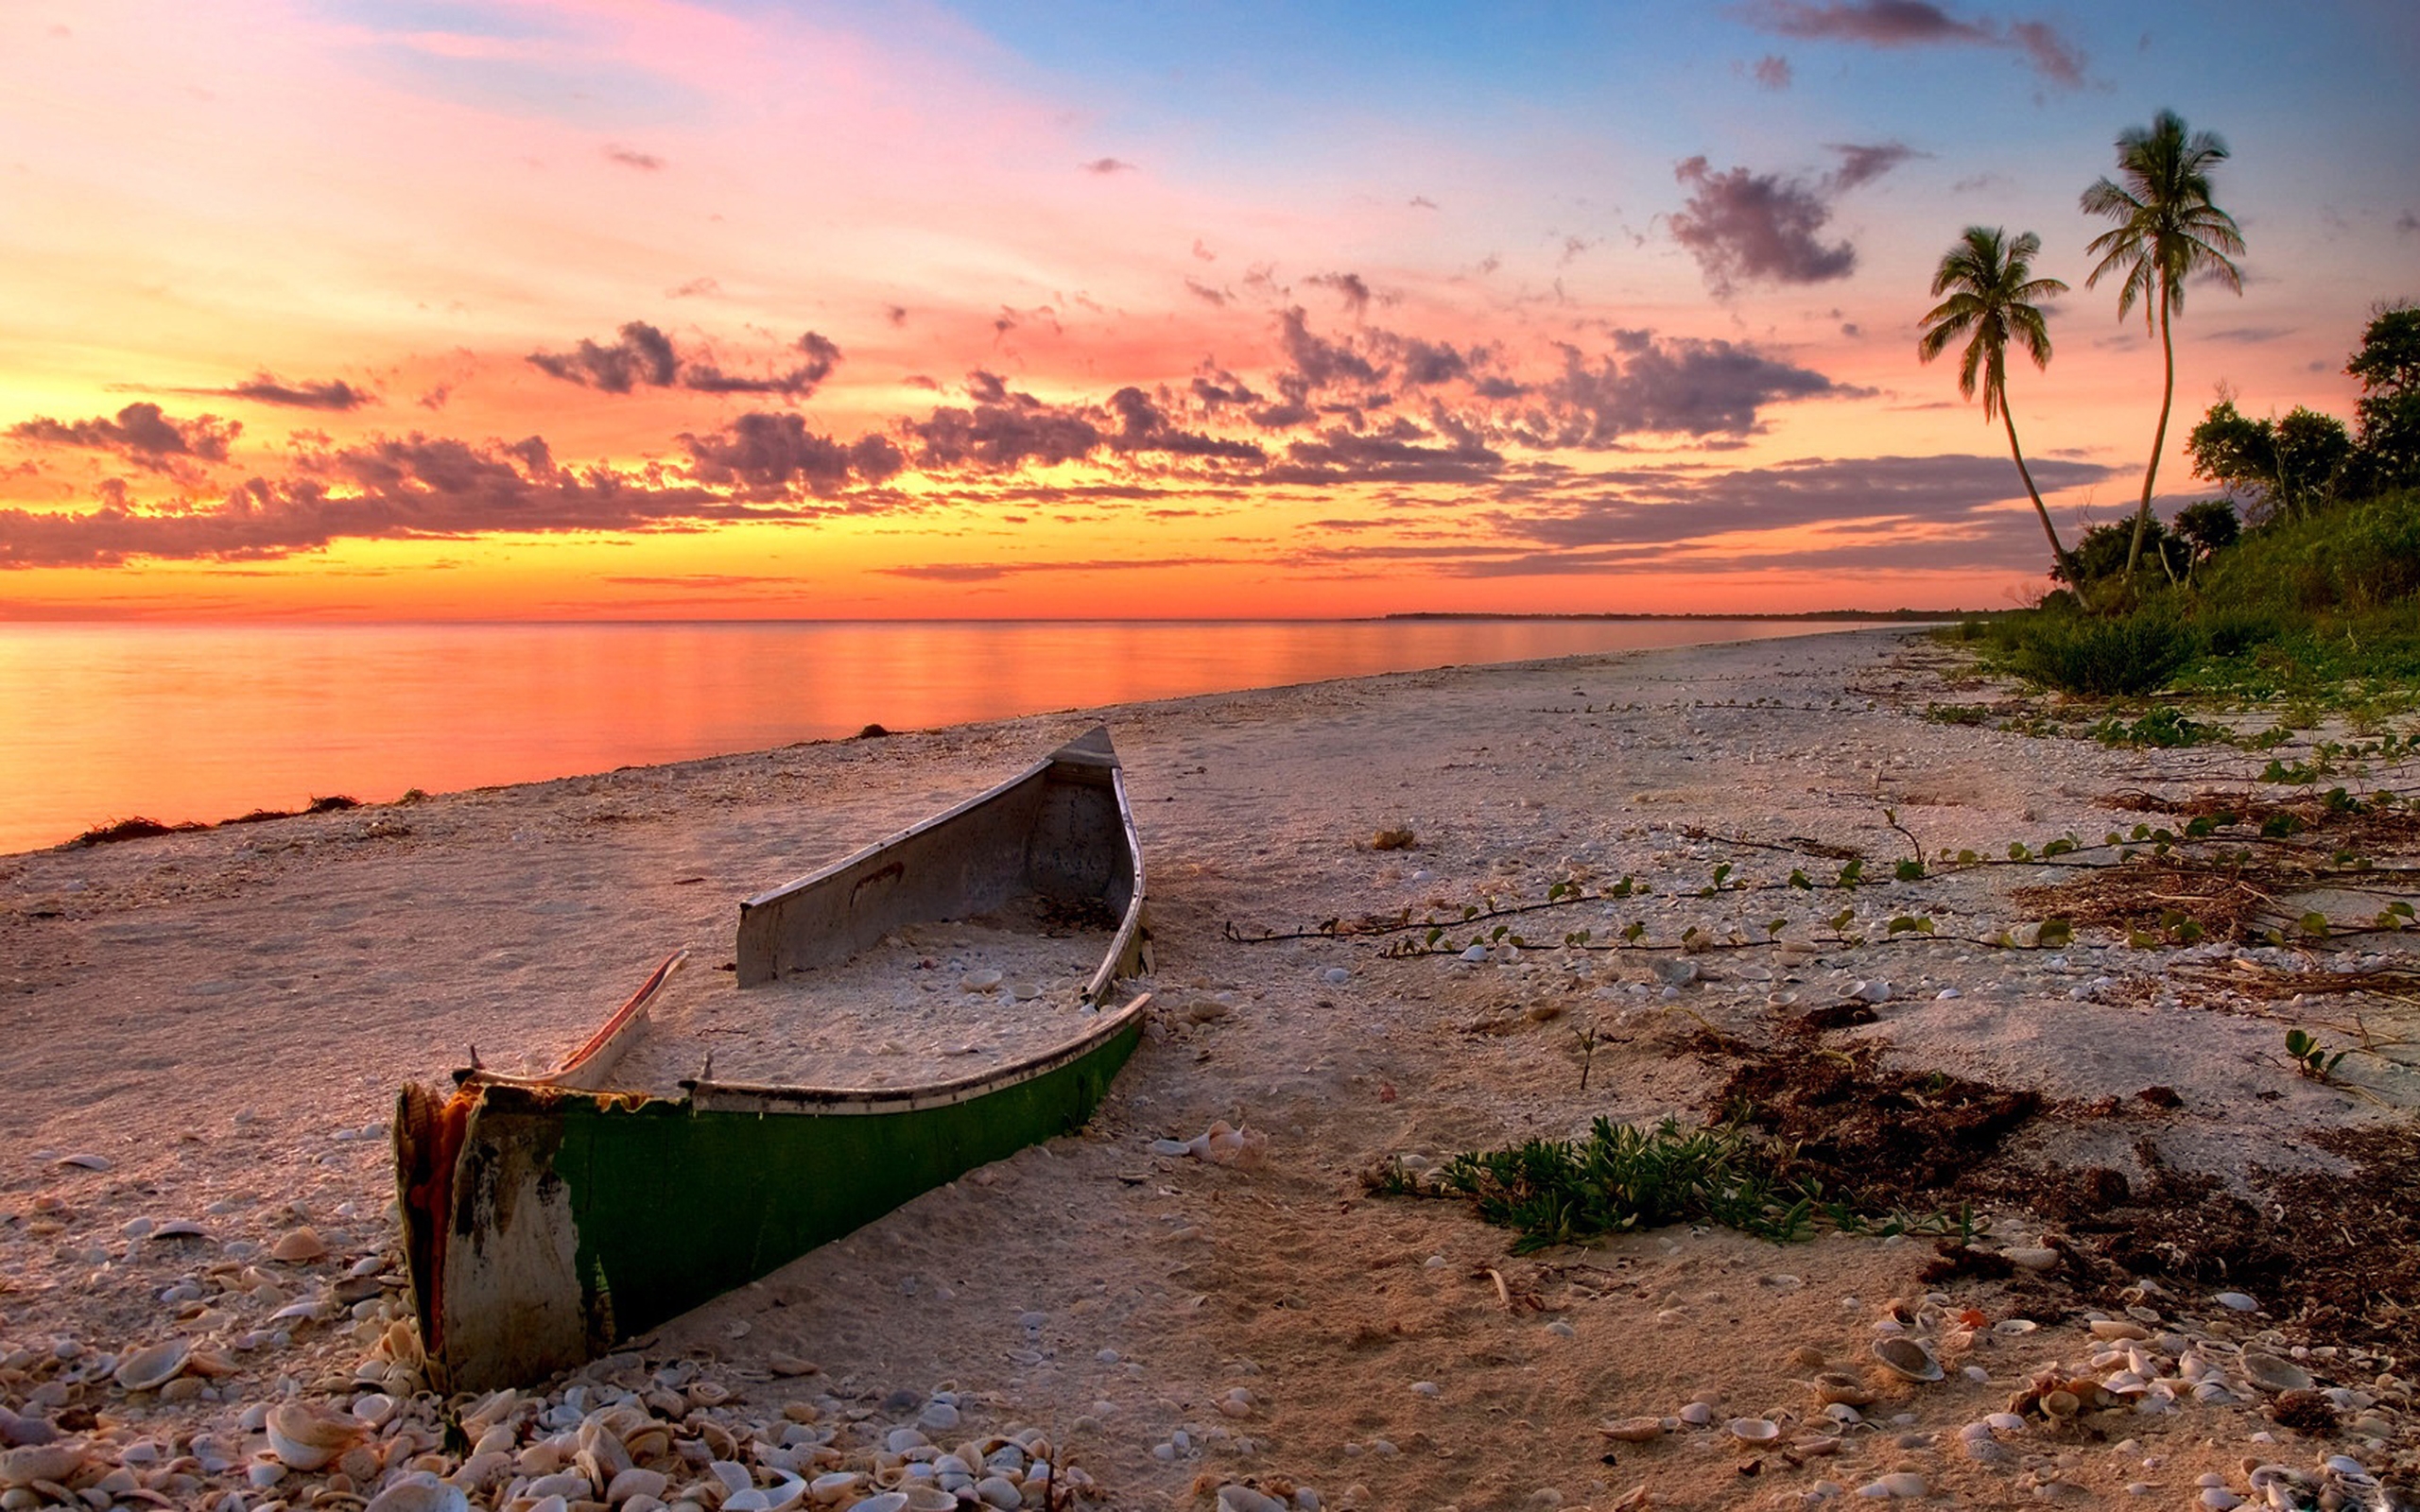 The Sunset Beach Scenery The Sea The Broken Boat The Red Clouds